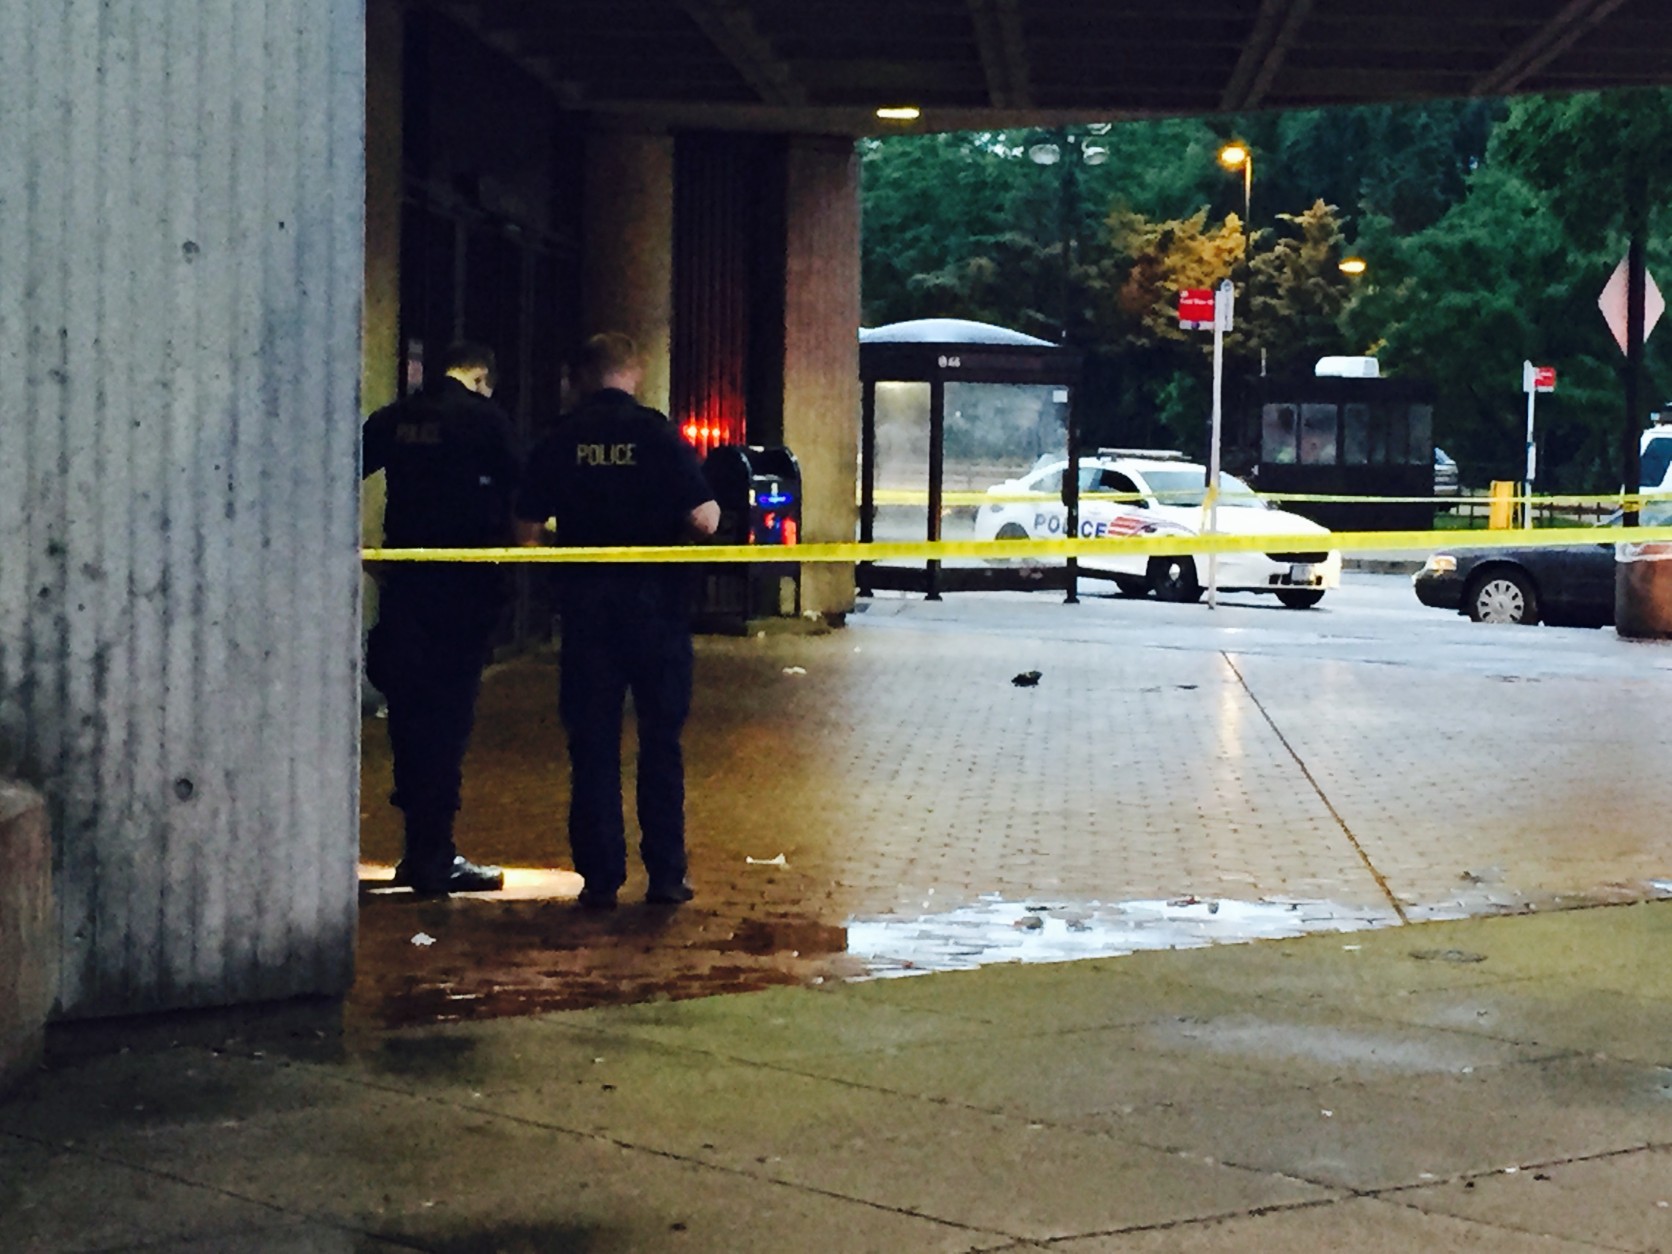 Police have closed off the entrance from the bus bay area at the Anacostia Metro station after a non-fatal shooting. (Photo courtesy of NBC4/Darcy Spencer)